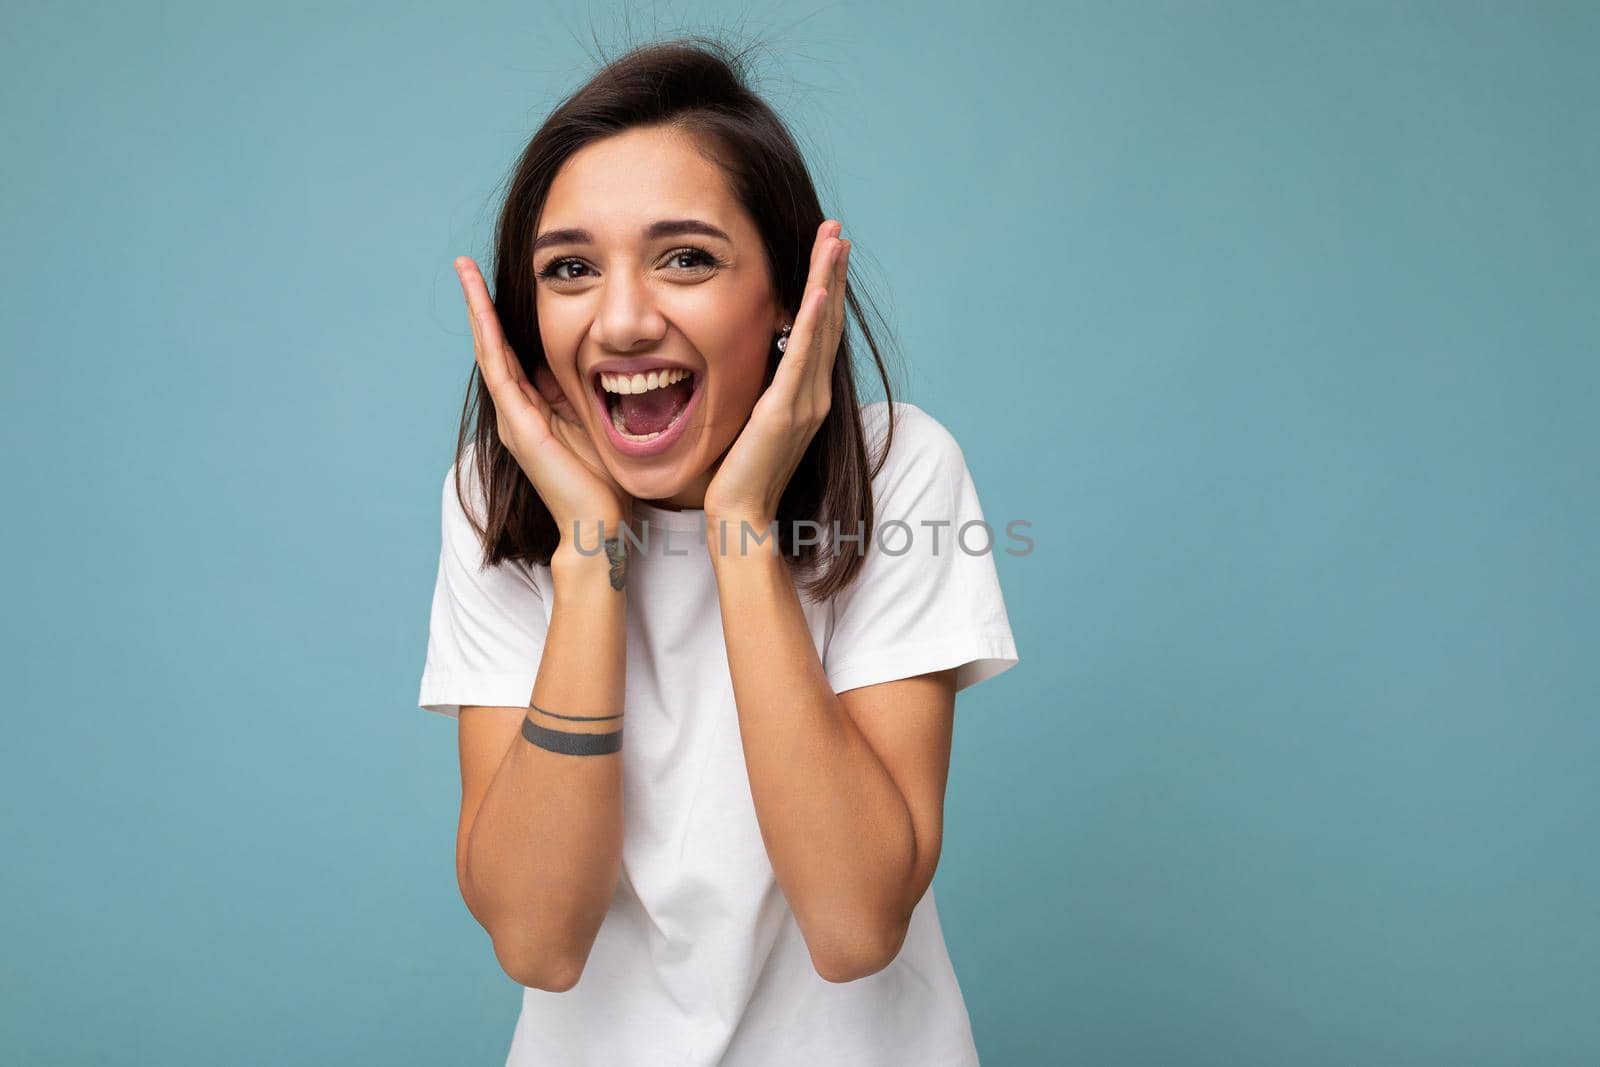 Portrait of happy positive smiling delightful young beautiful brunette woman with sincere emotions wearing casual white t-shirt for mockup isolated on blue background with copy space.